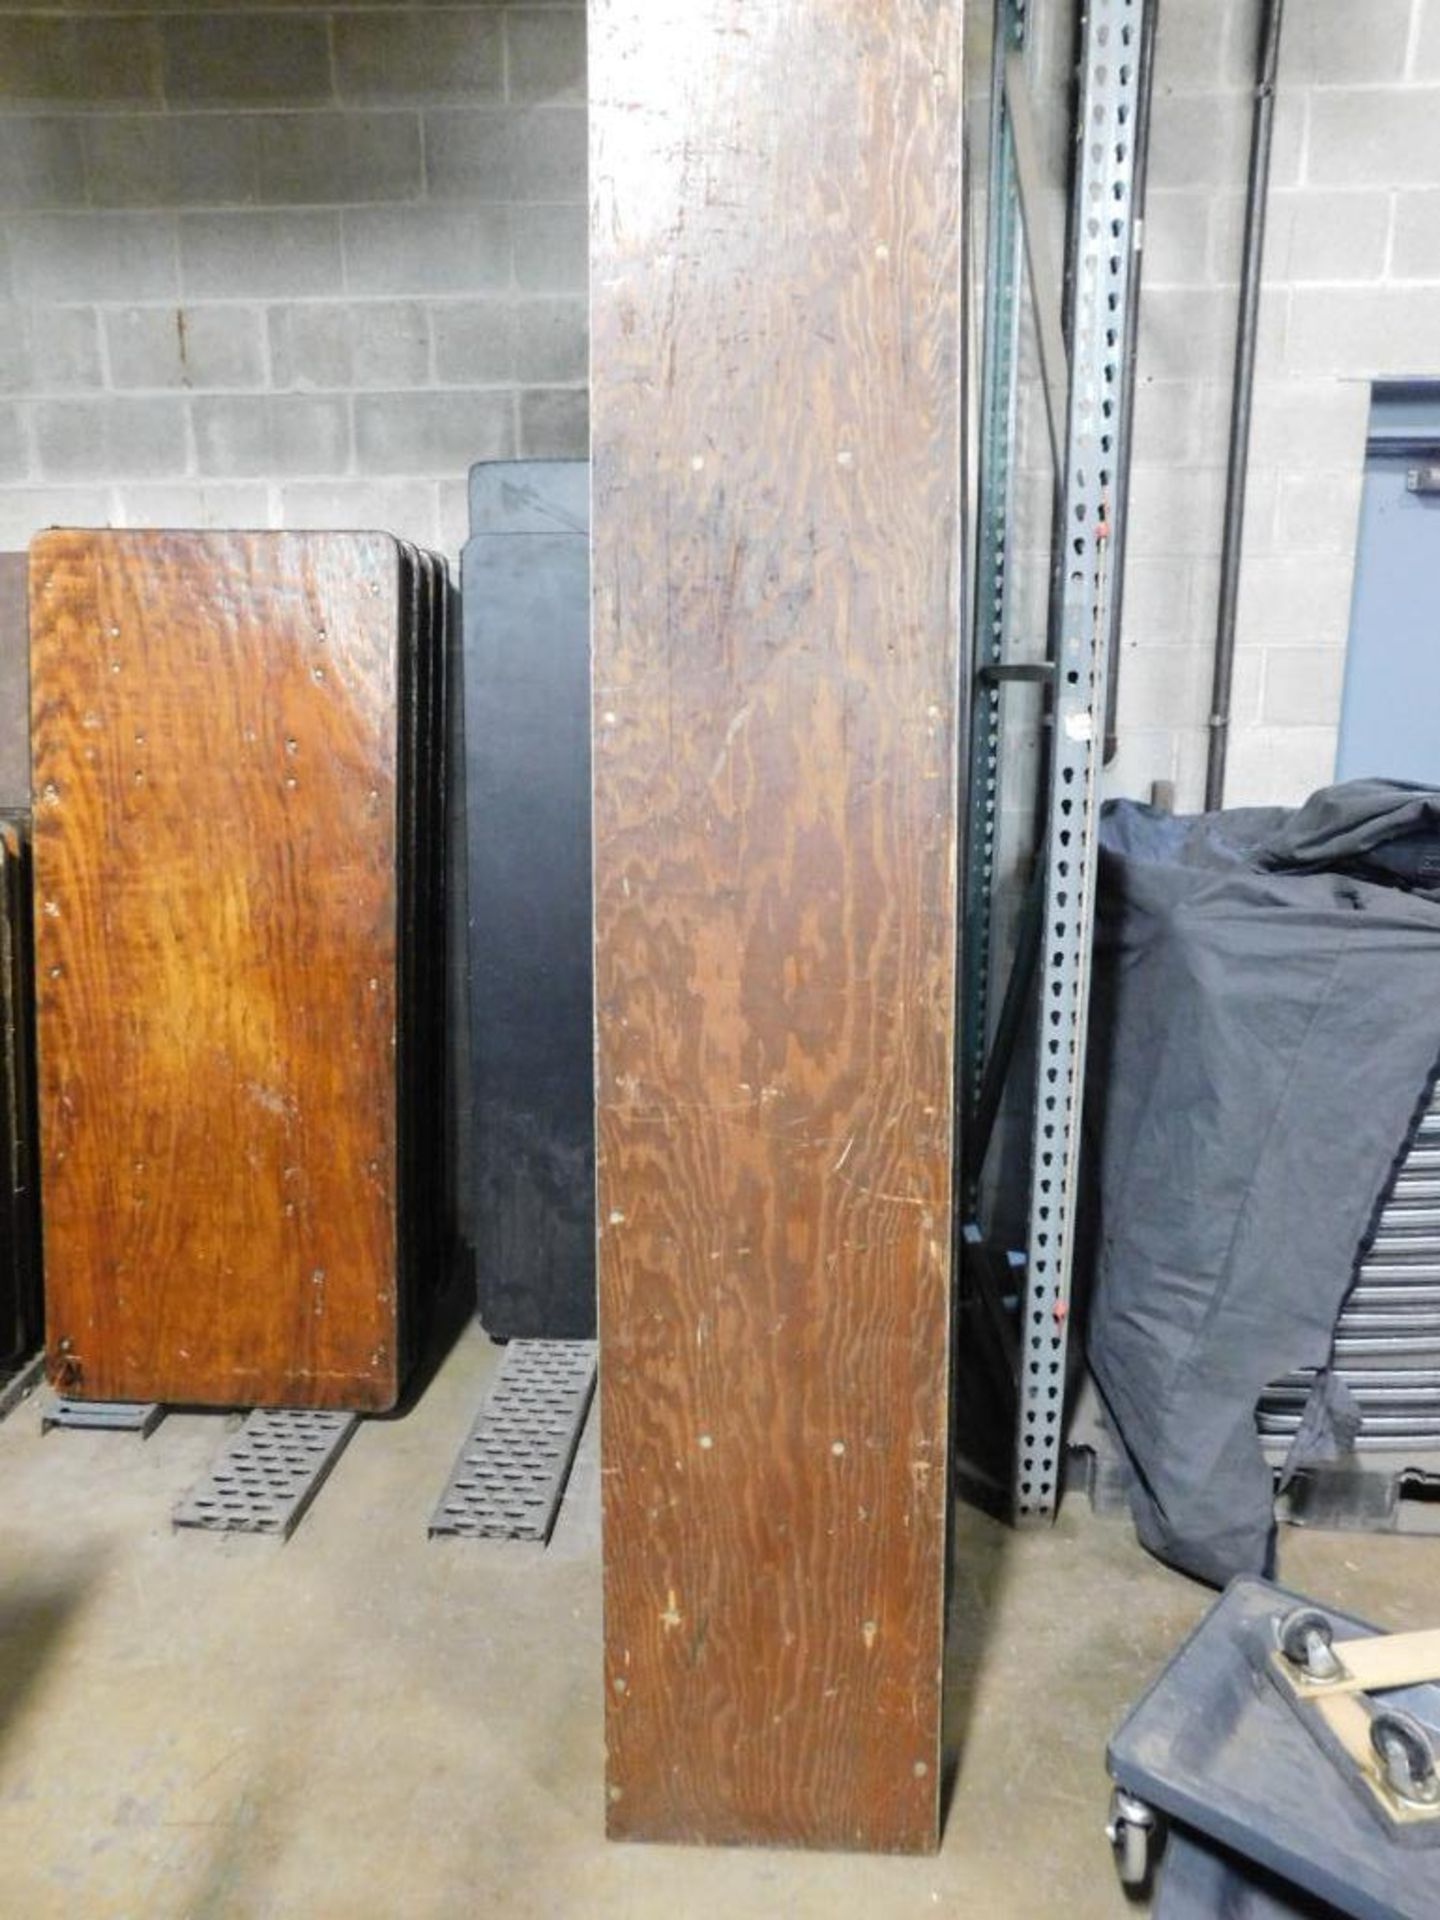 LOT: (10) 8' x 18" Wood Top Tables (LOCATION: 1766 Waukegan Rd., Glenview, IL 60025)